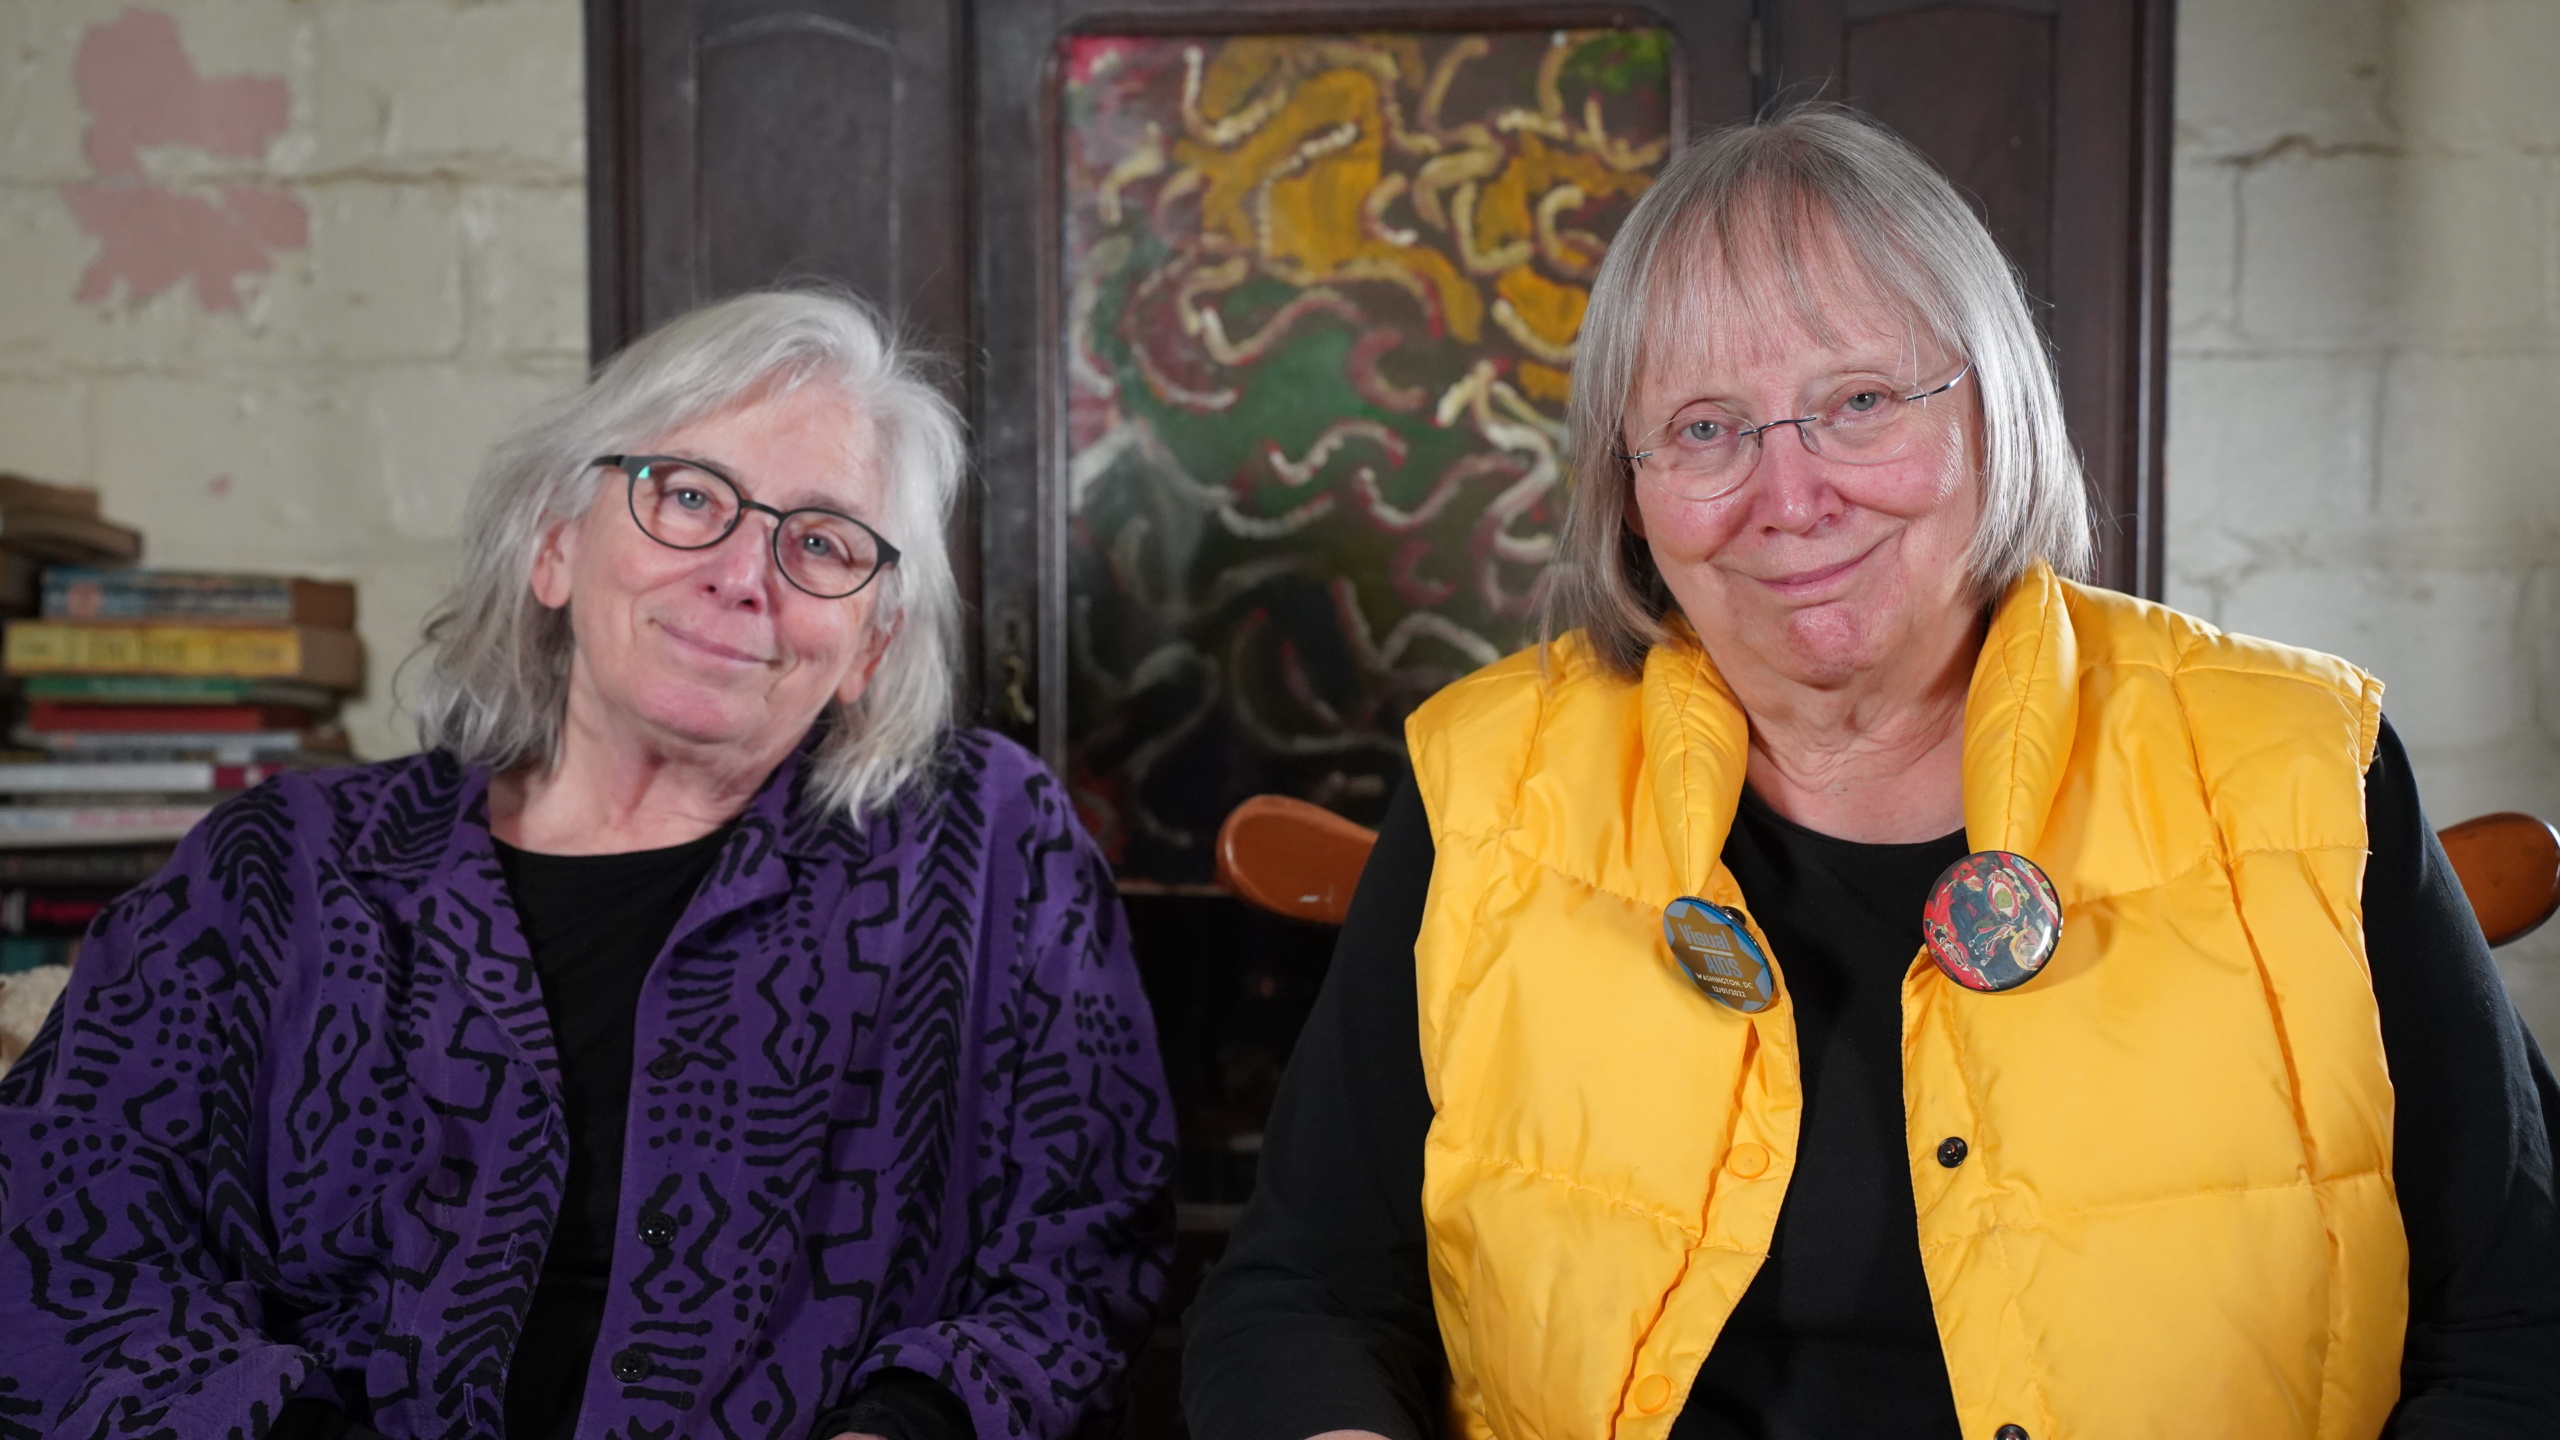 Cathy Fink and Marcy Marxer, Day With(out) Art 12/1/22